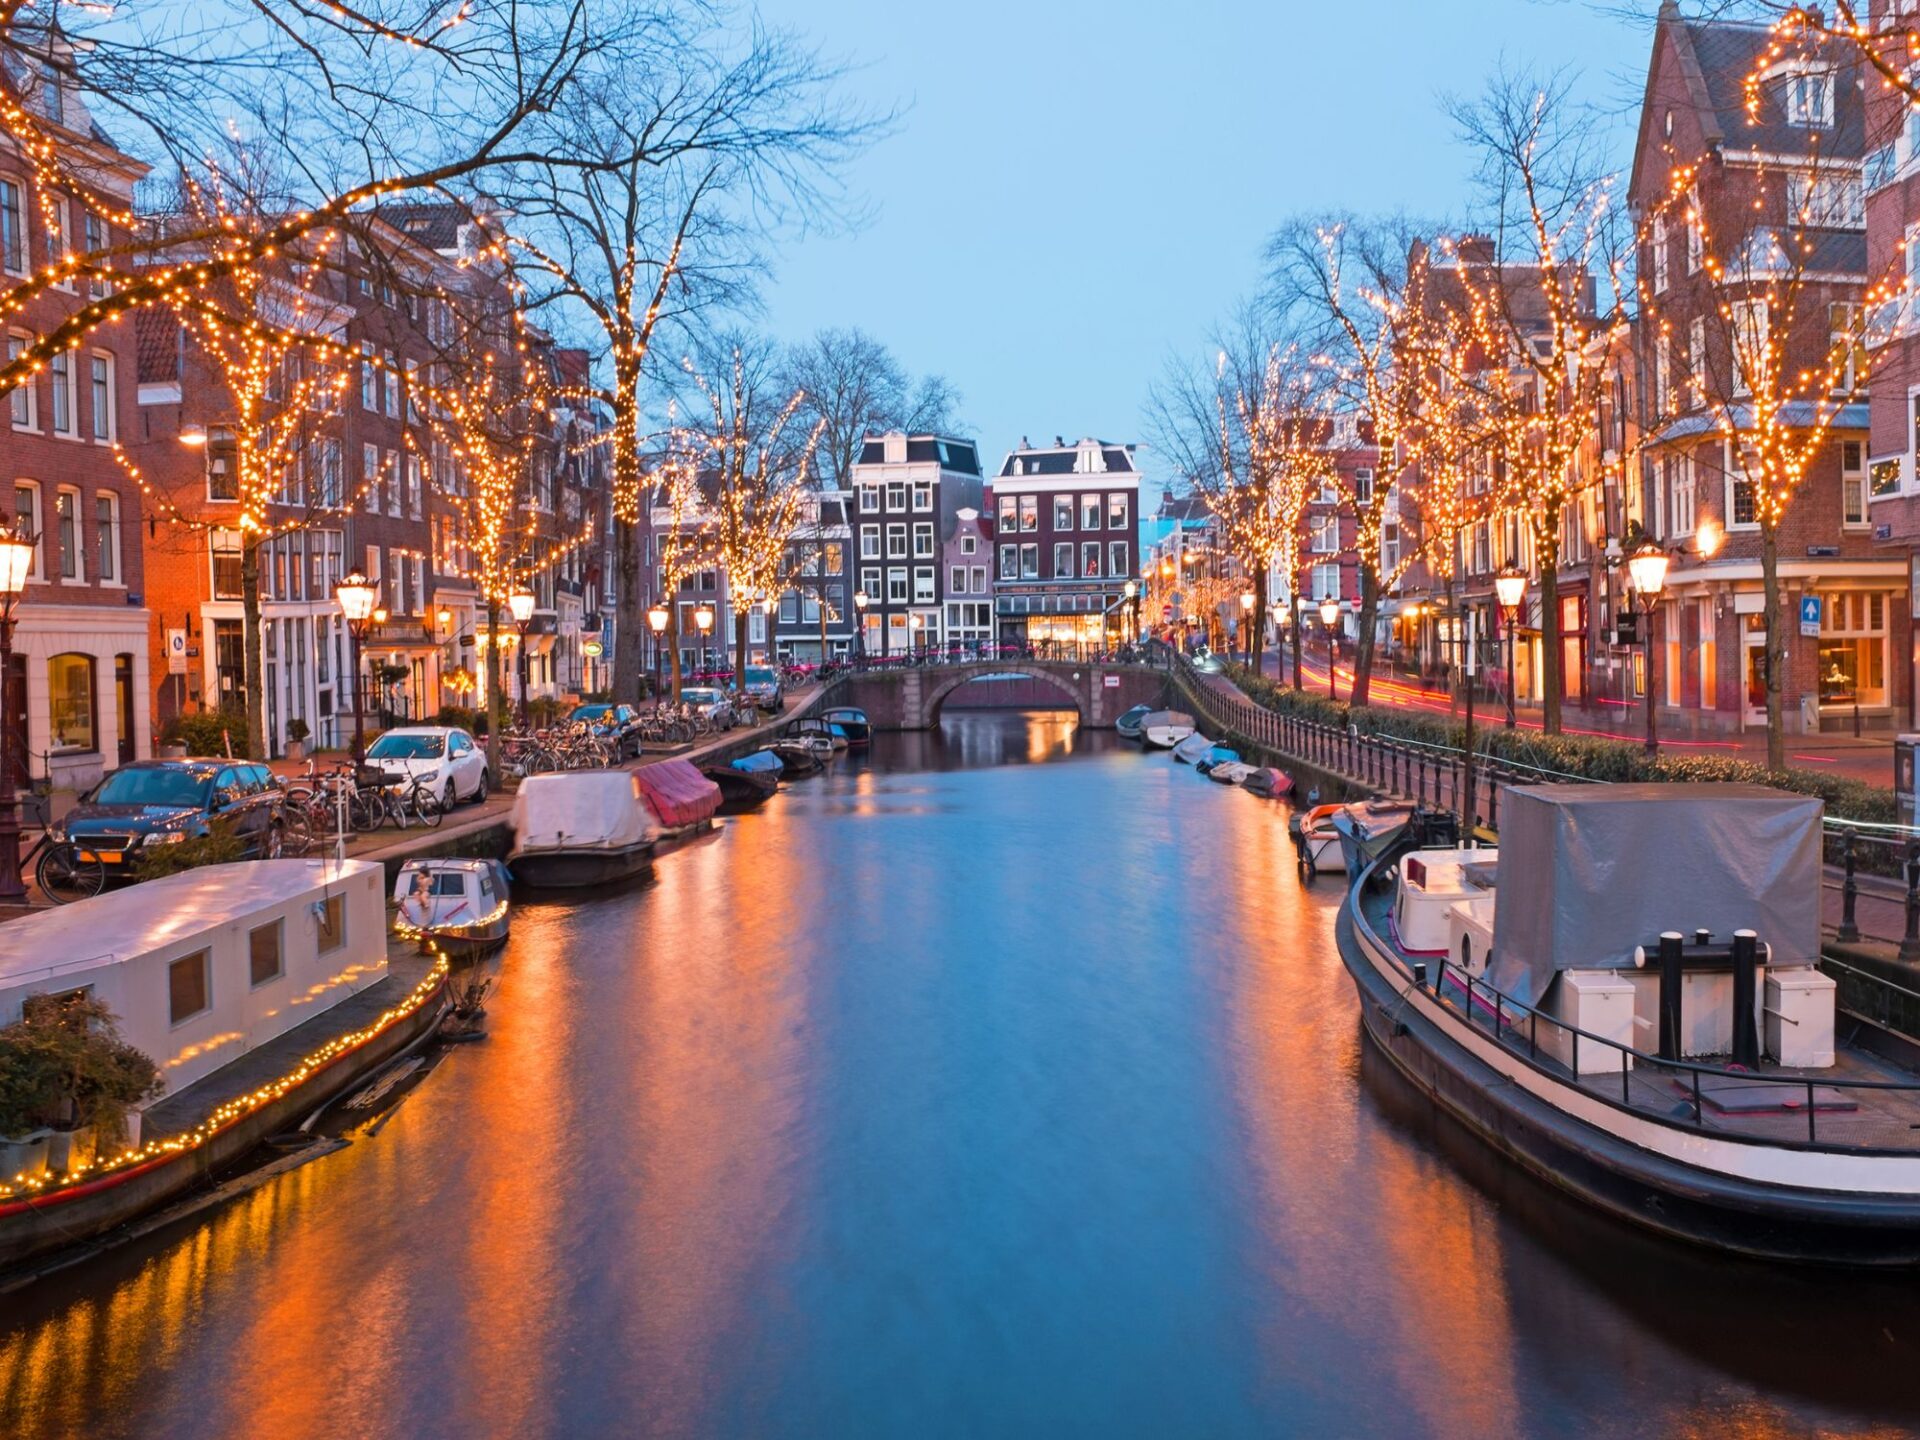 Best European Countries To Visit in Summer from UAE - Netherlands